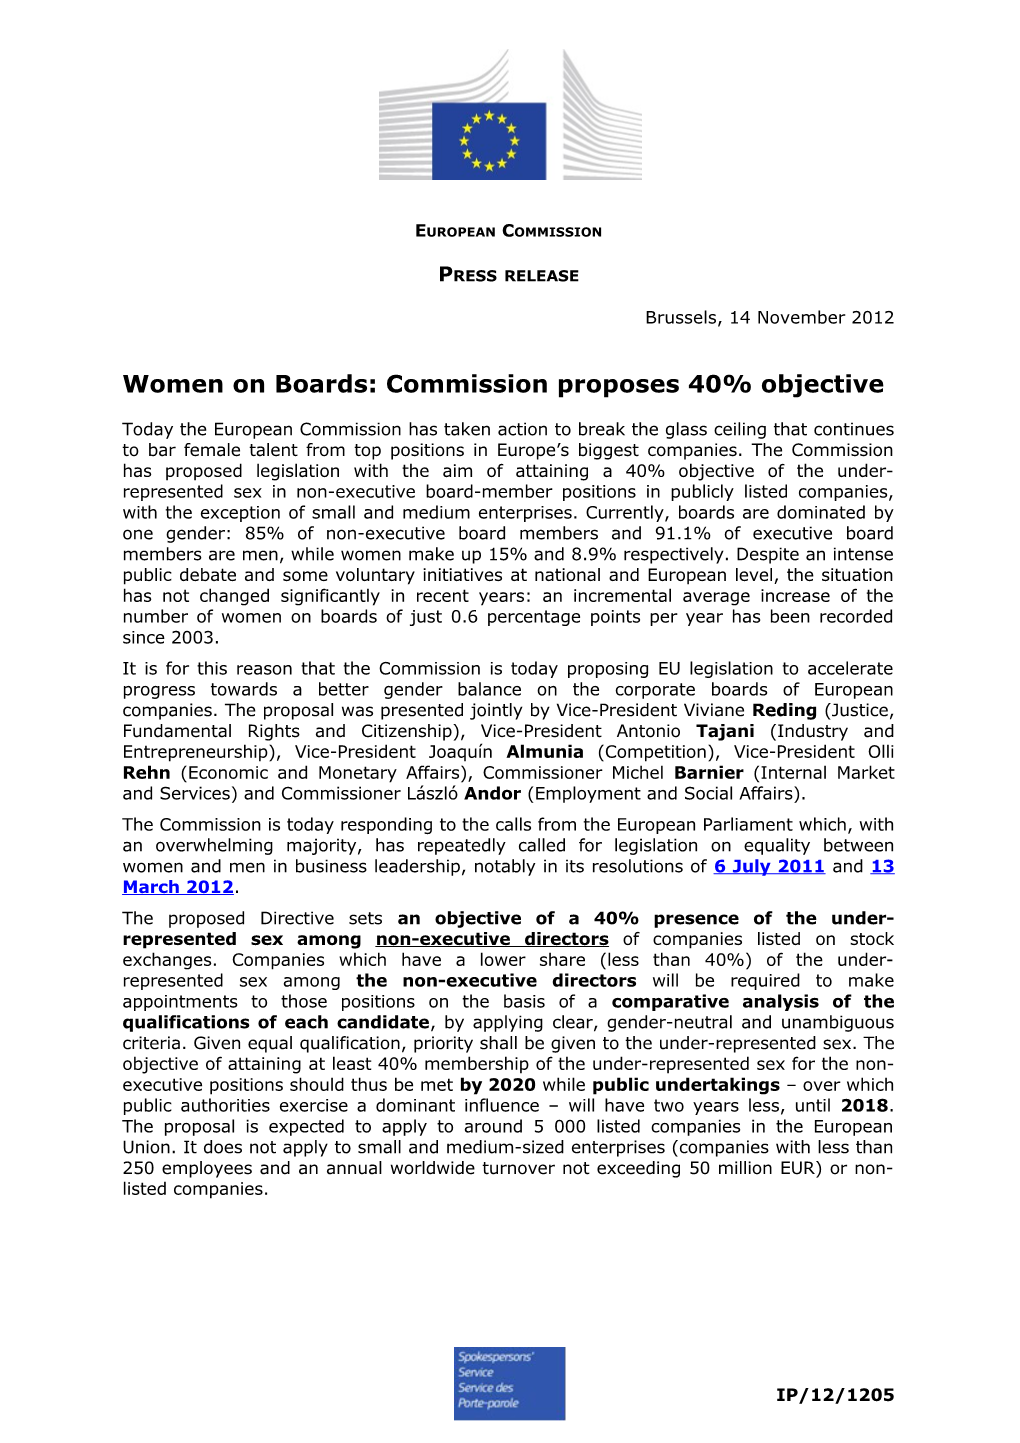 Women on Boards: Commission Proposes 40% Objective